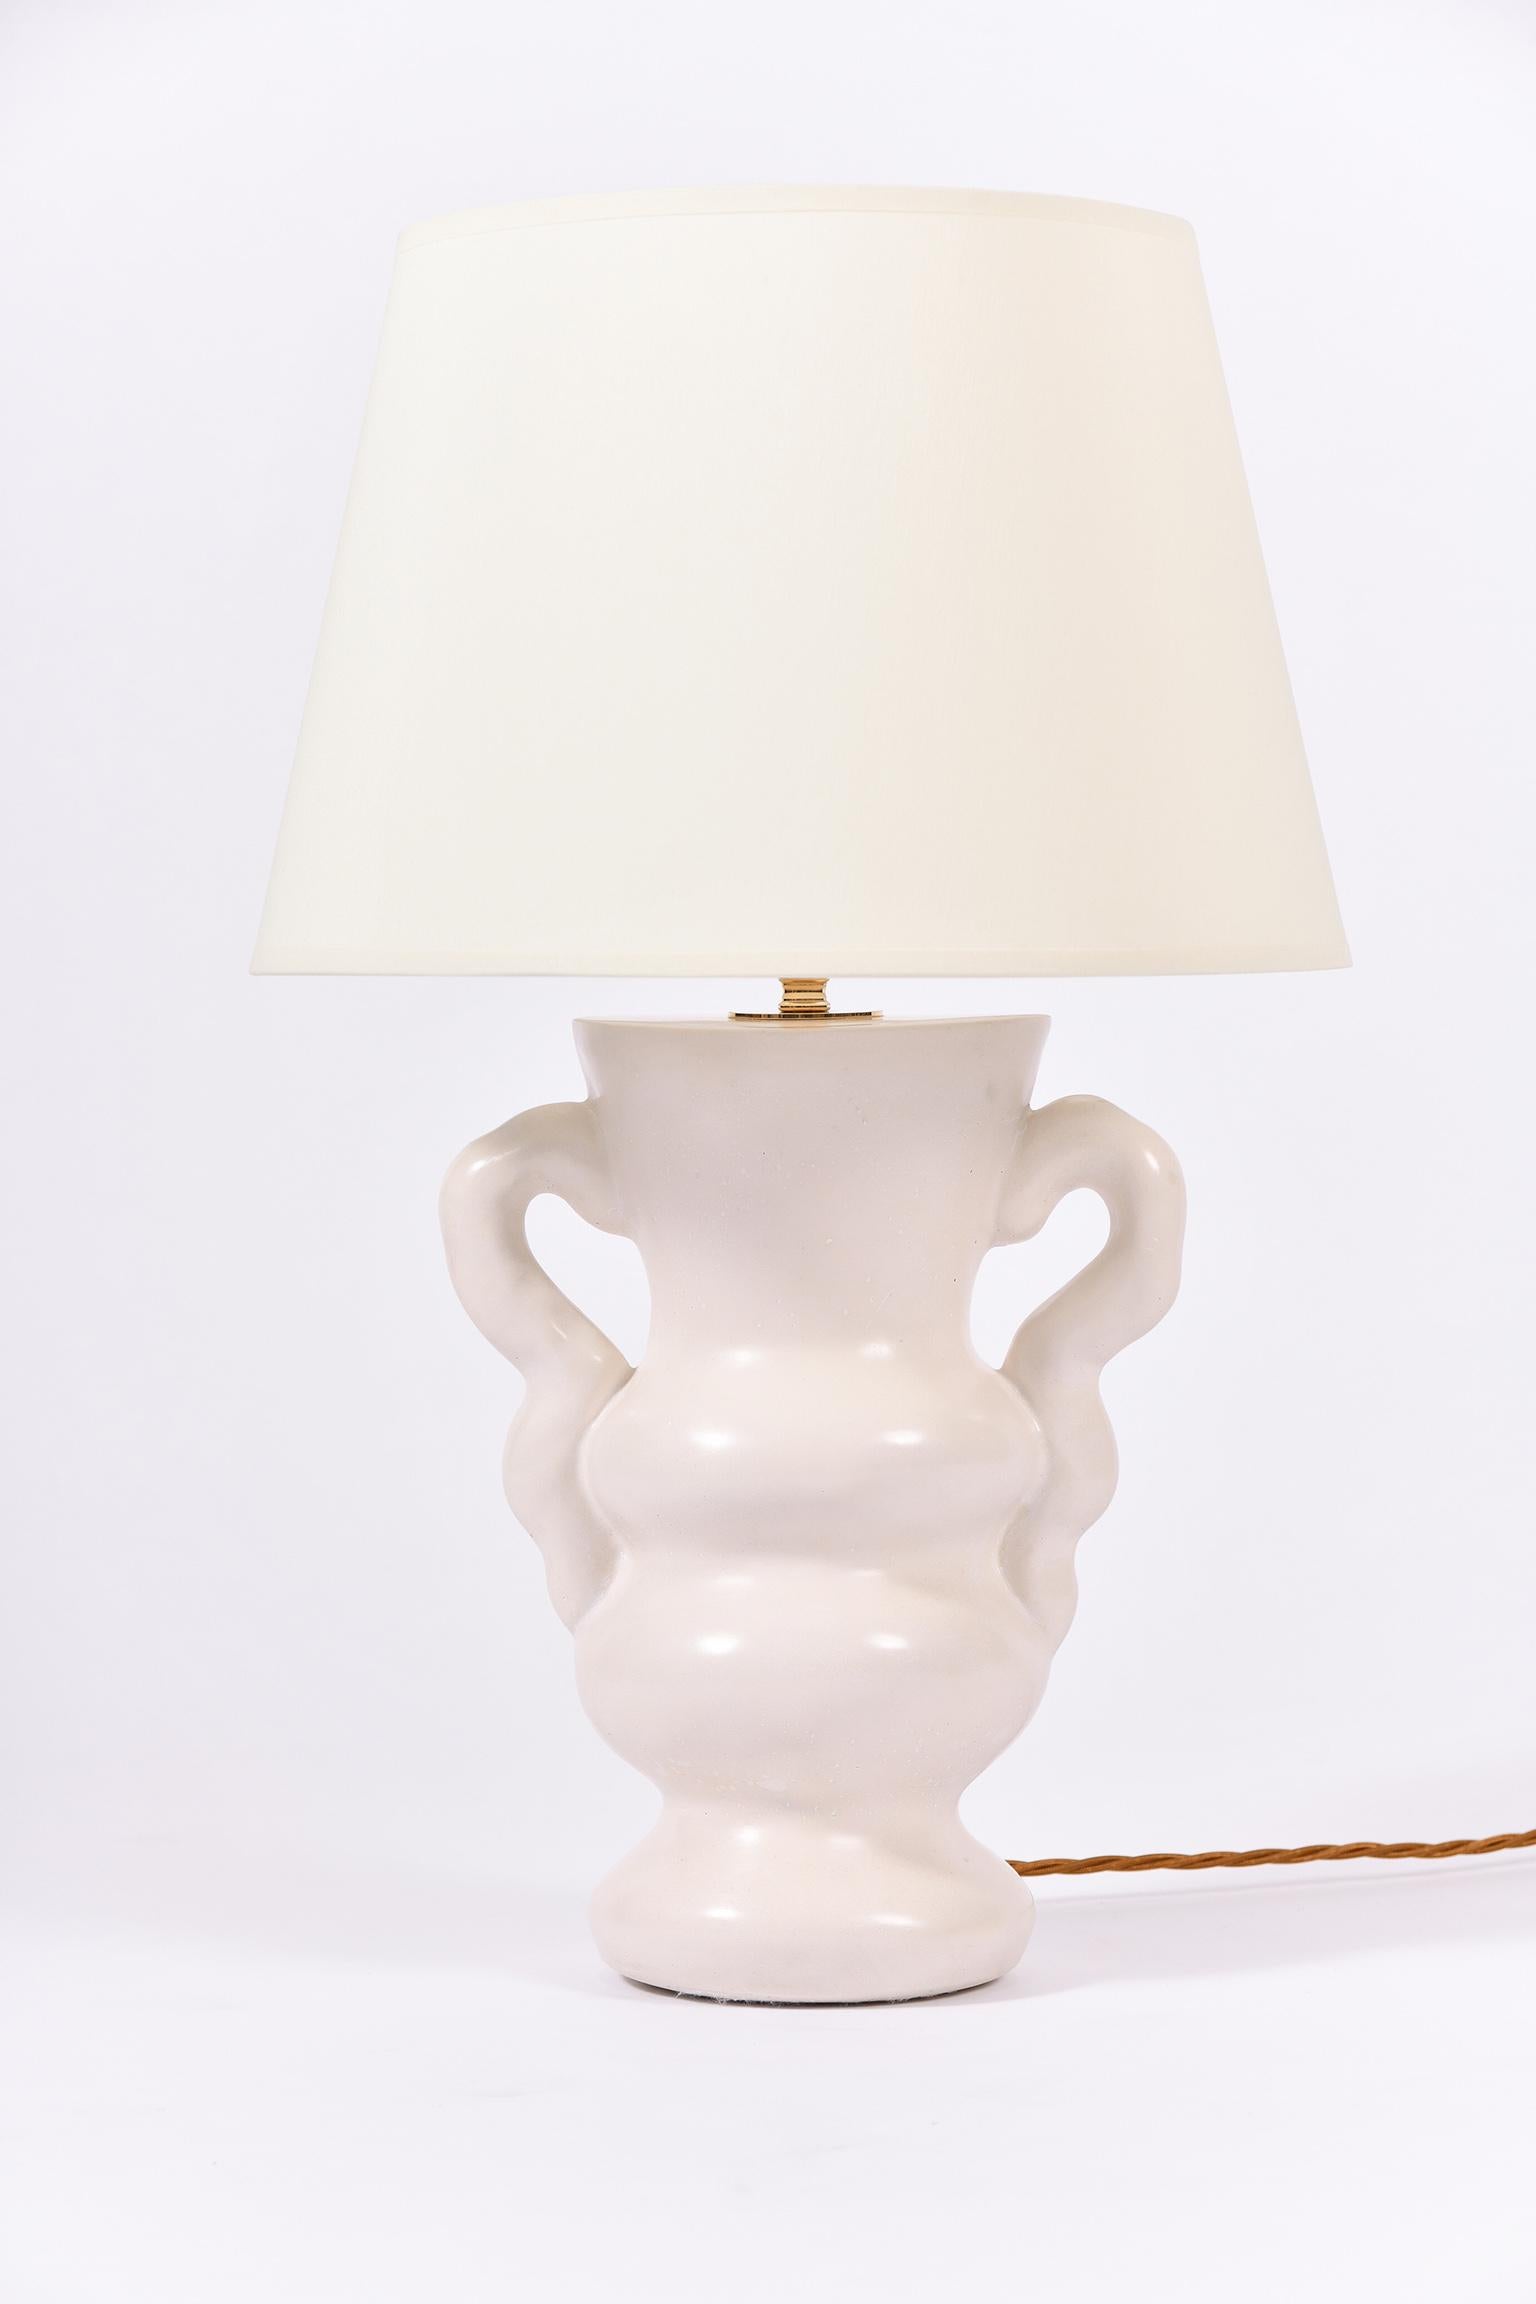 English White Polished Plaster Table Lamp, by Dorian Caffot de Fawes